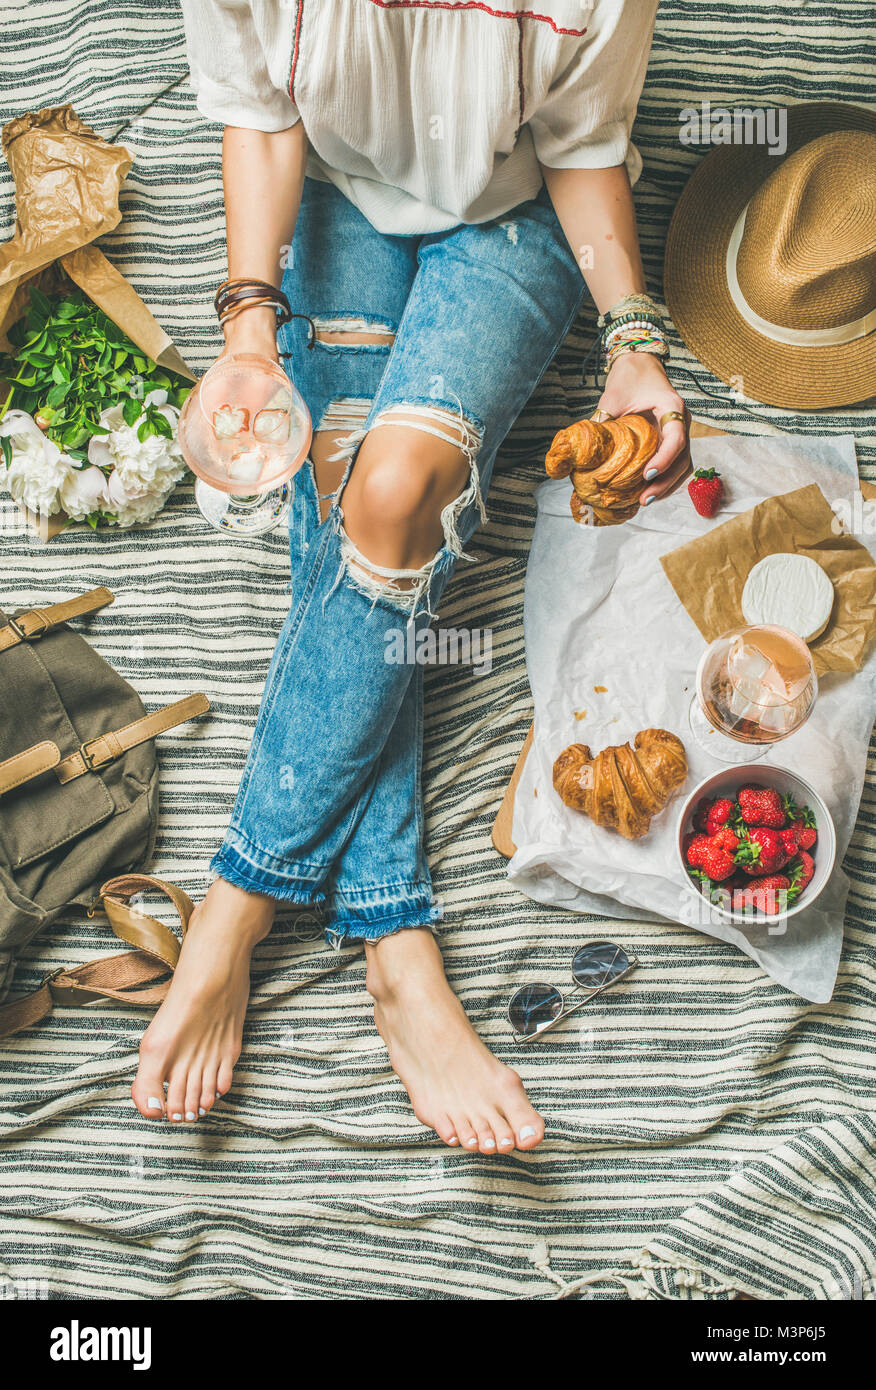 French style romantic outdoor picnic setting, top view Stock Photo